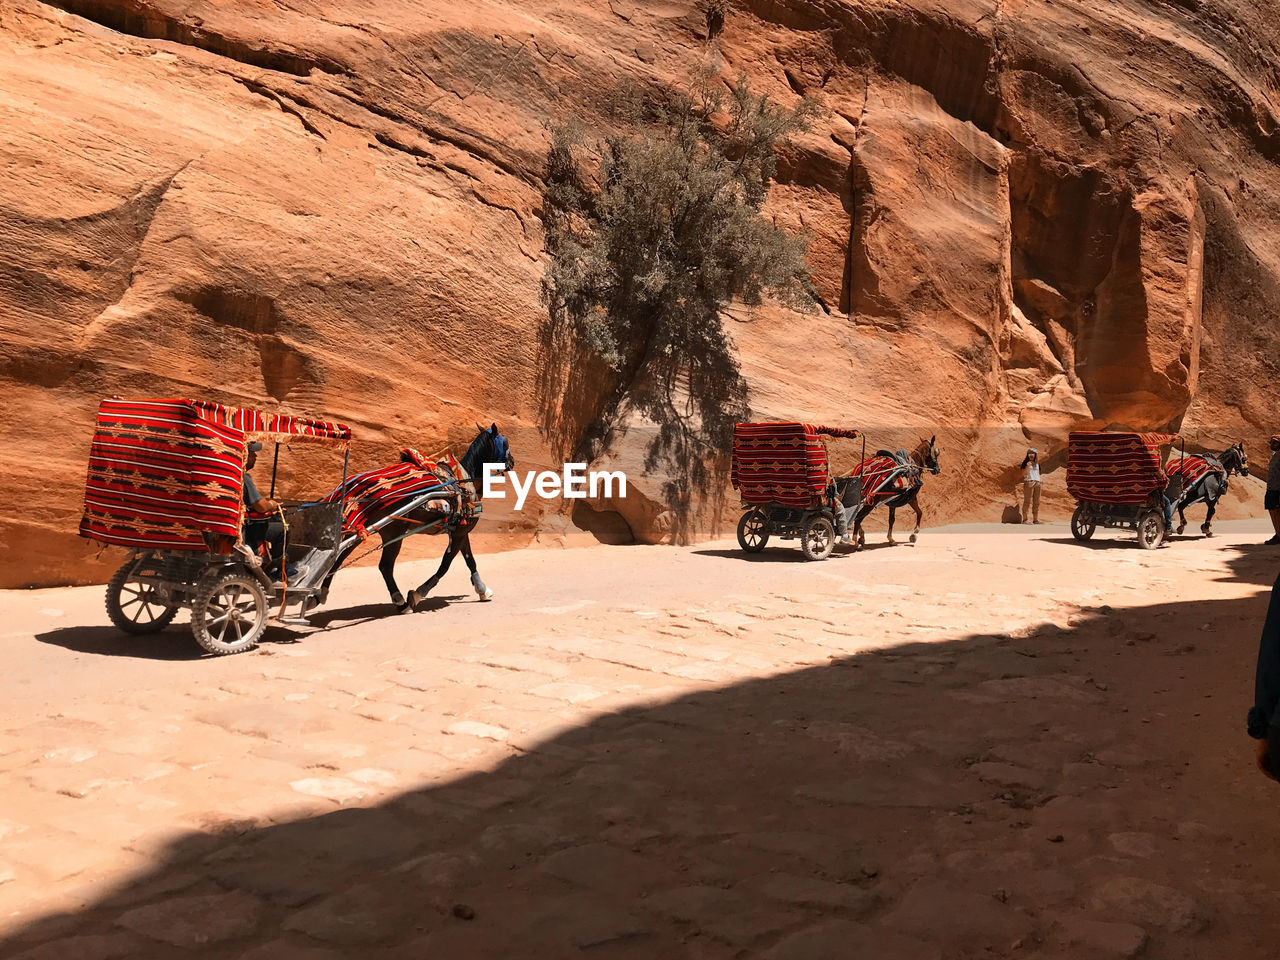 Horse drawn carriage in petra